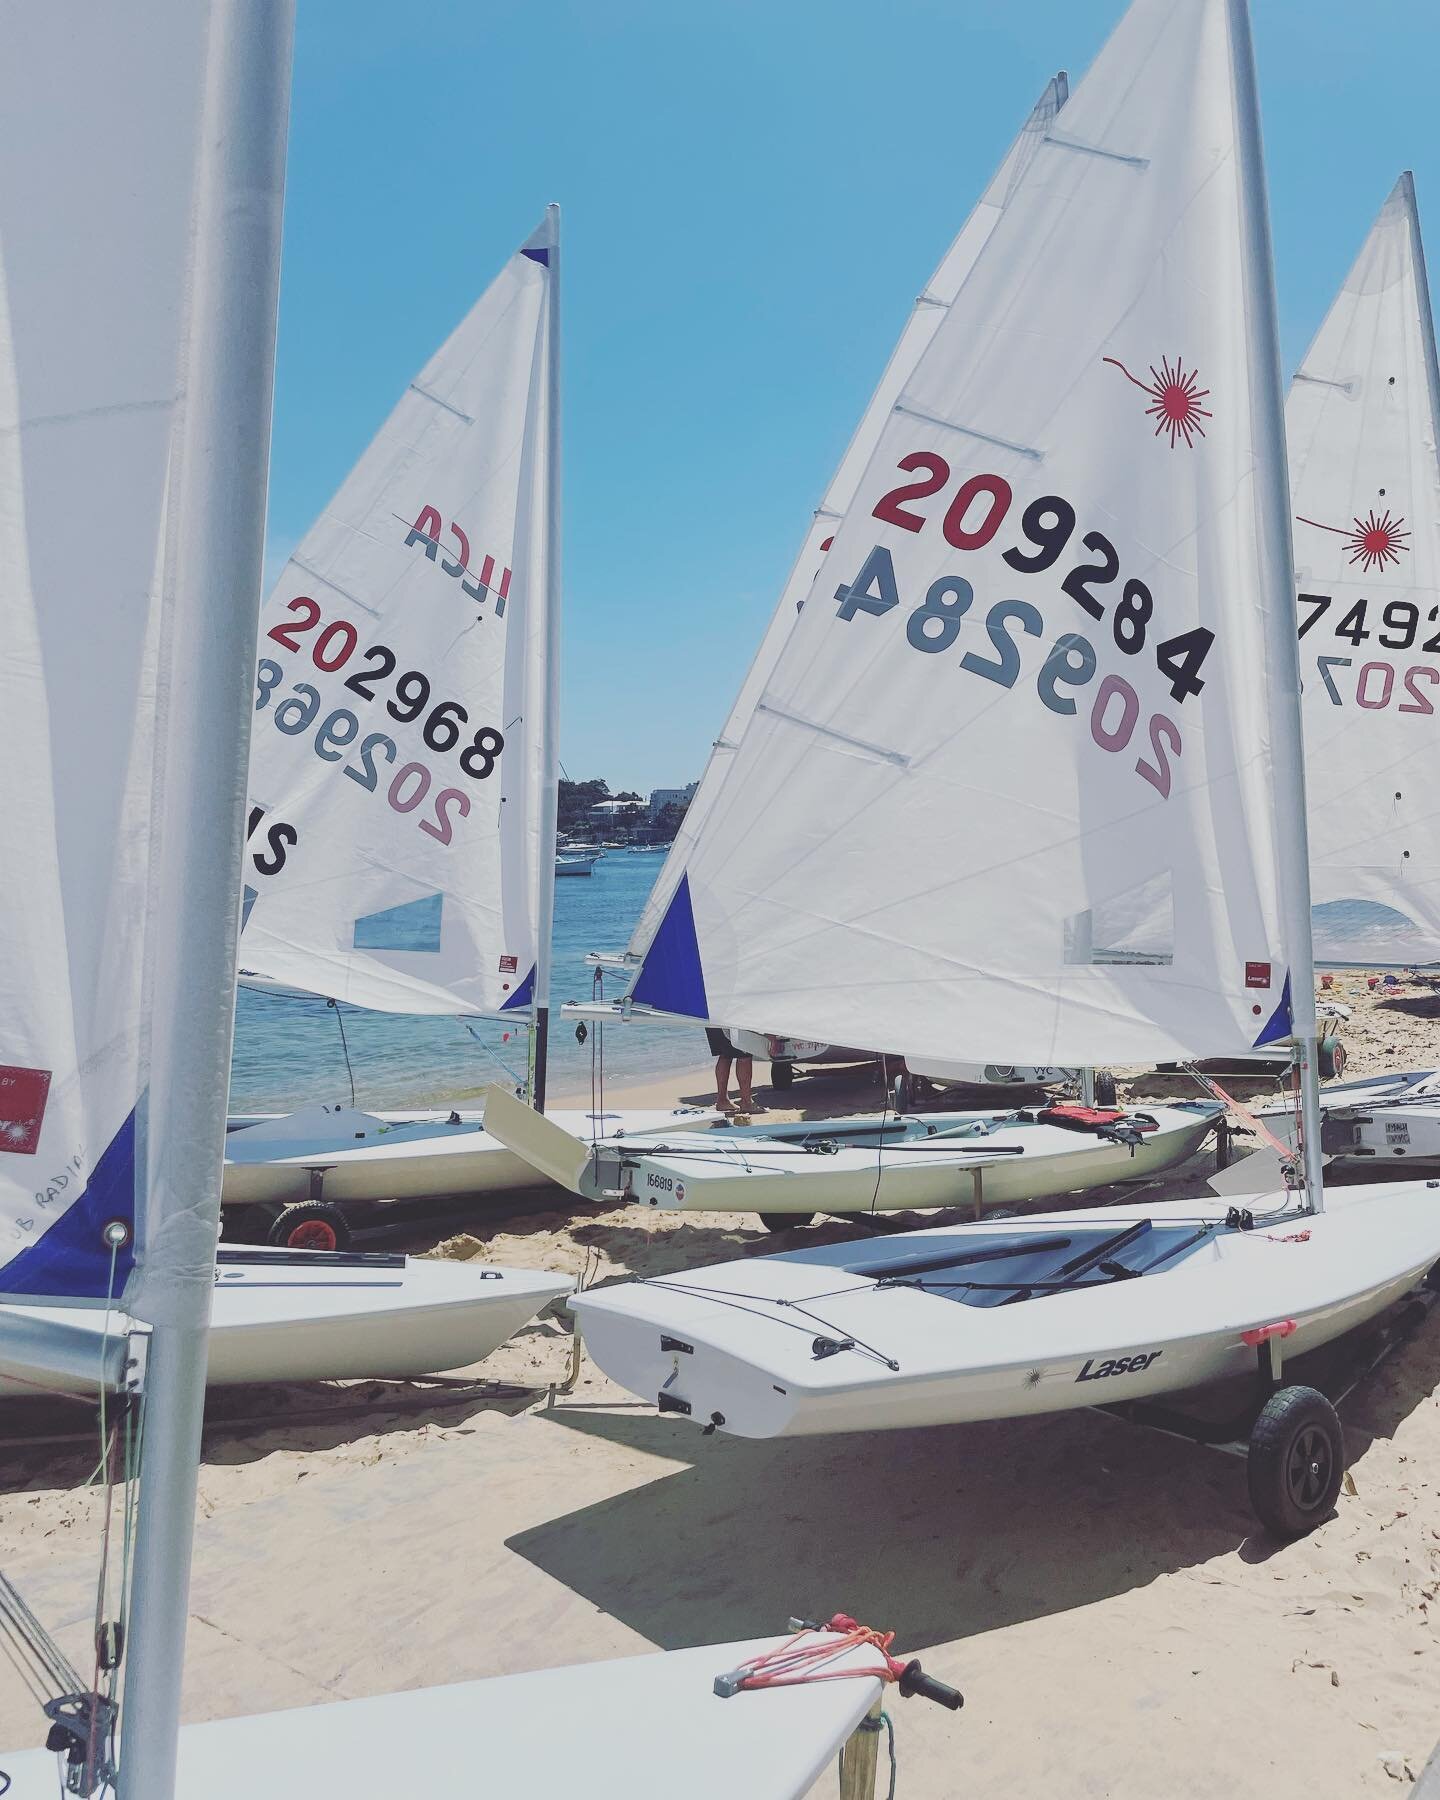 And we&rsquo;re racing! 

The 20/21 season has kicked off with a record fleet of nearly 40 Lasers all competing for the opening race series &lsquo;Tink &amp; Furball Cup&rsquo;

Big thanks to @field_to_fork for getting behind this race and providing 